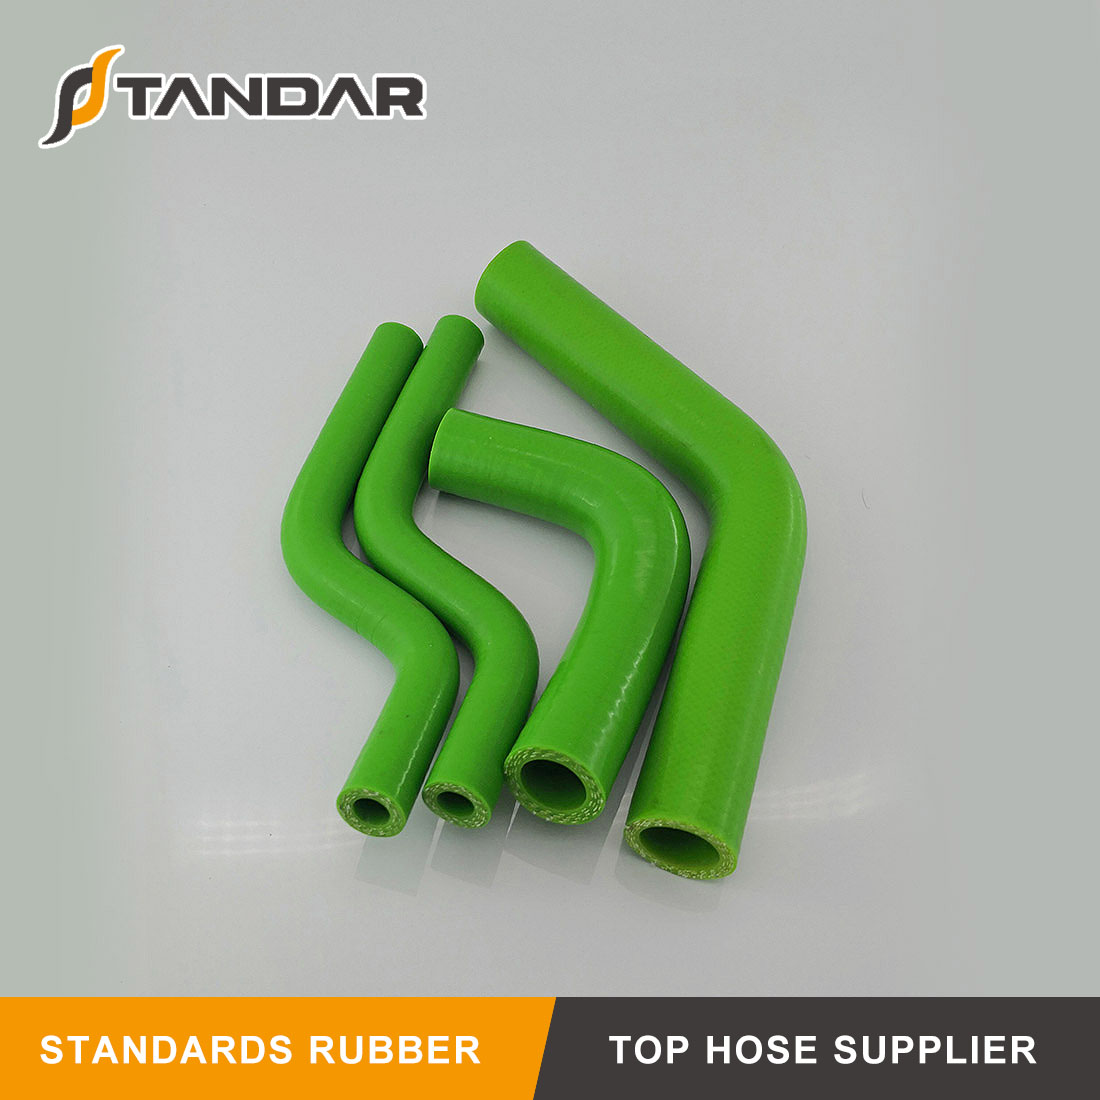 The role and application of silicone hose in automobile